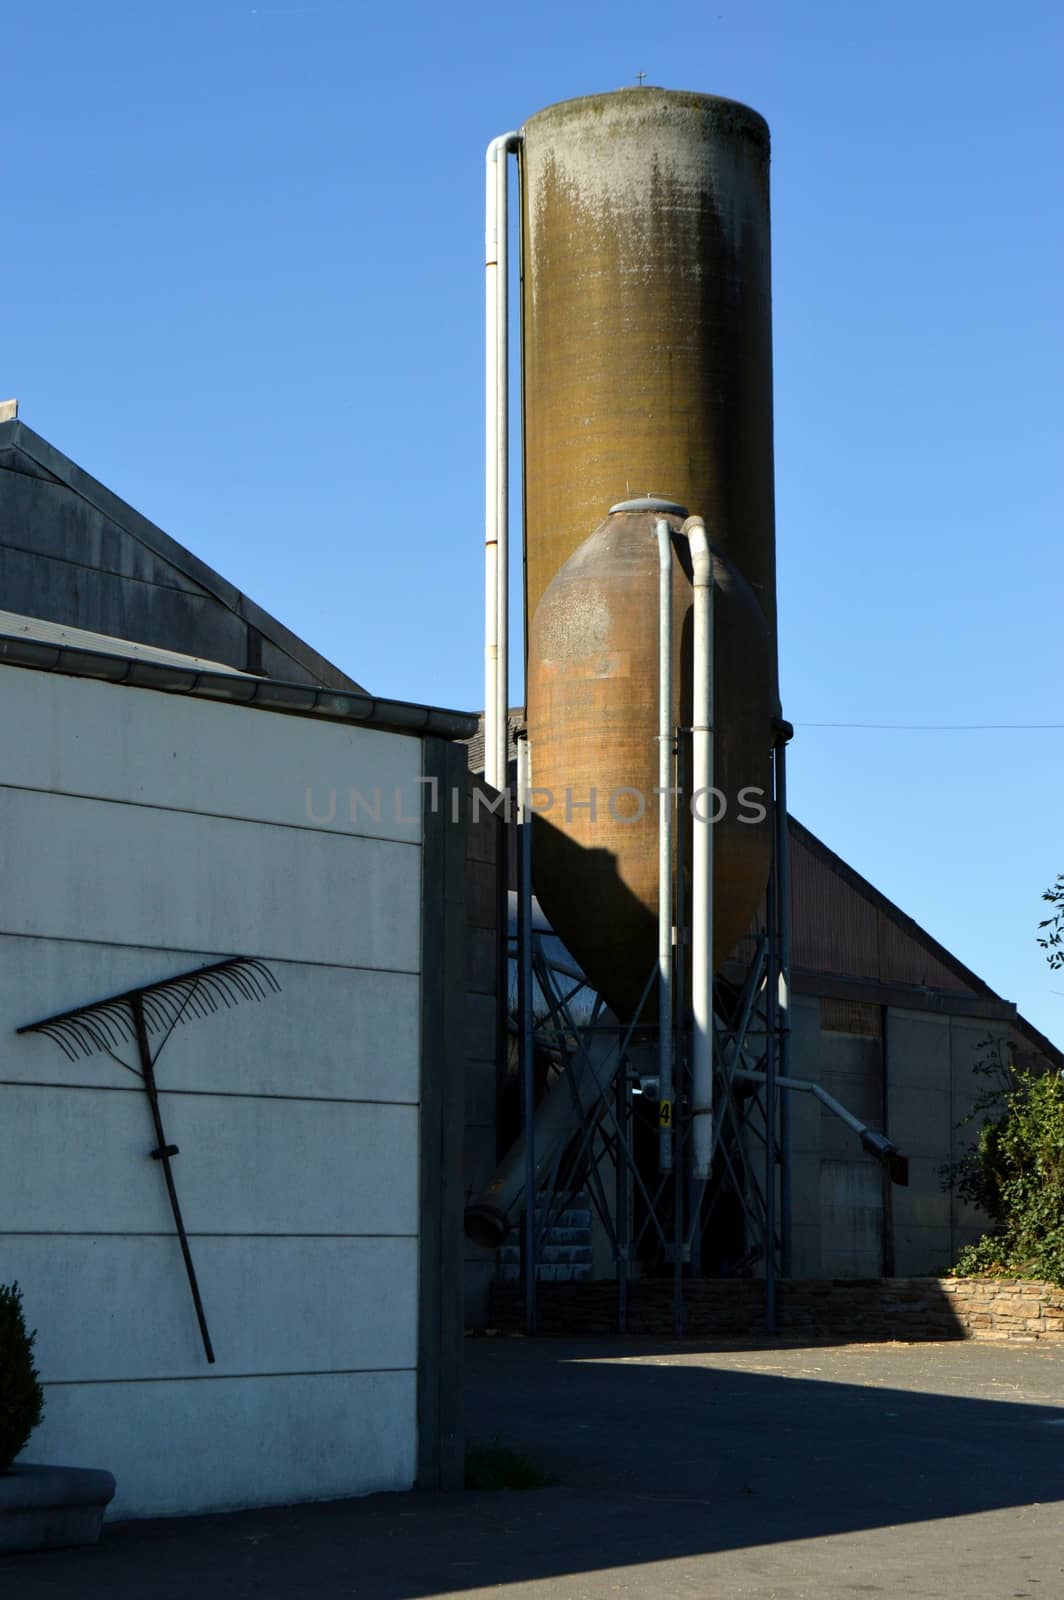 Grain silos in front of a barn with a blue sky.